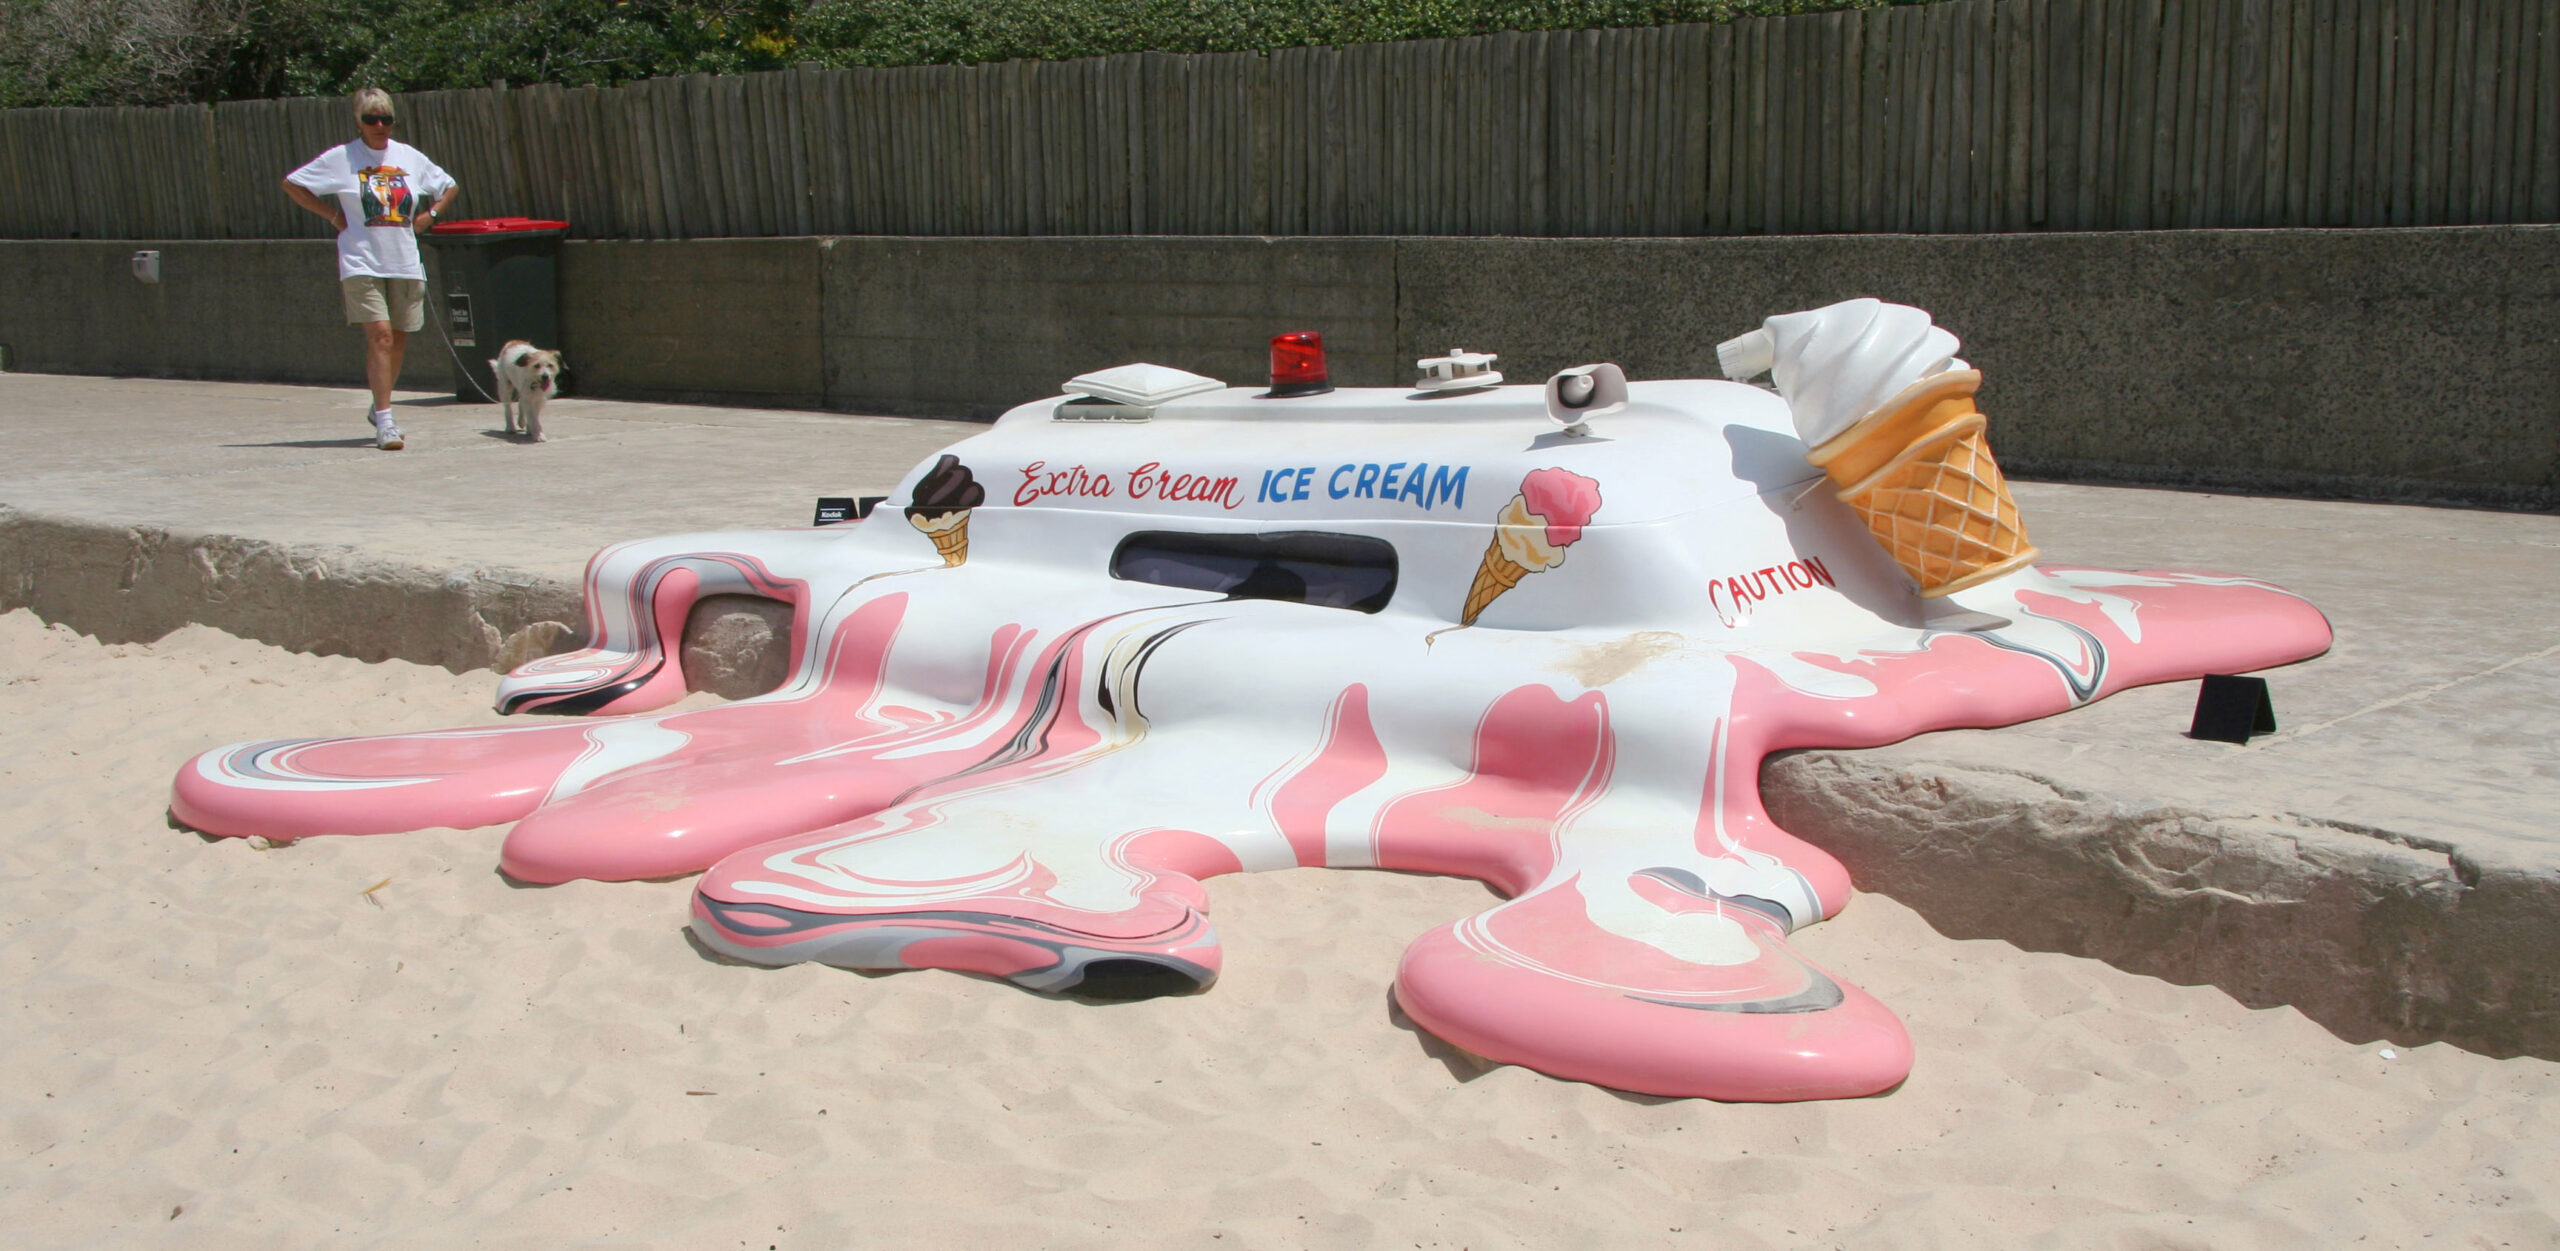 sculpture of melted ice cream truck